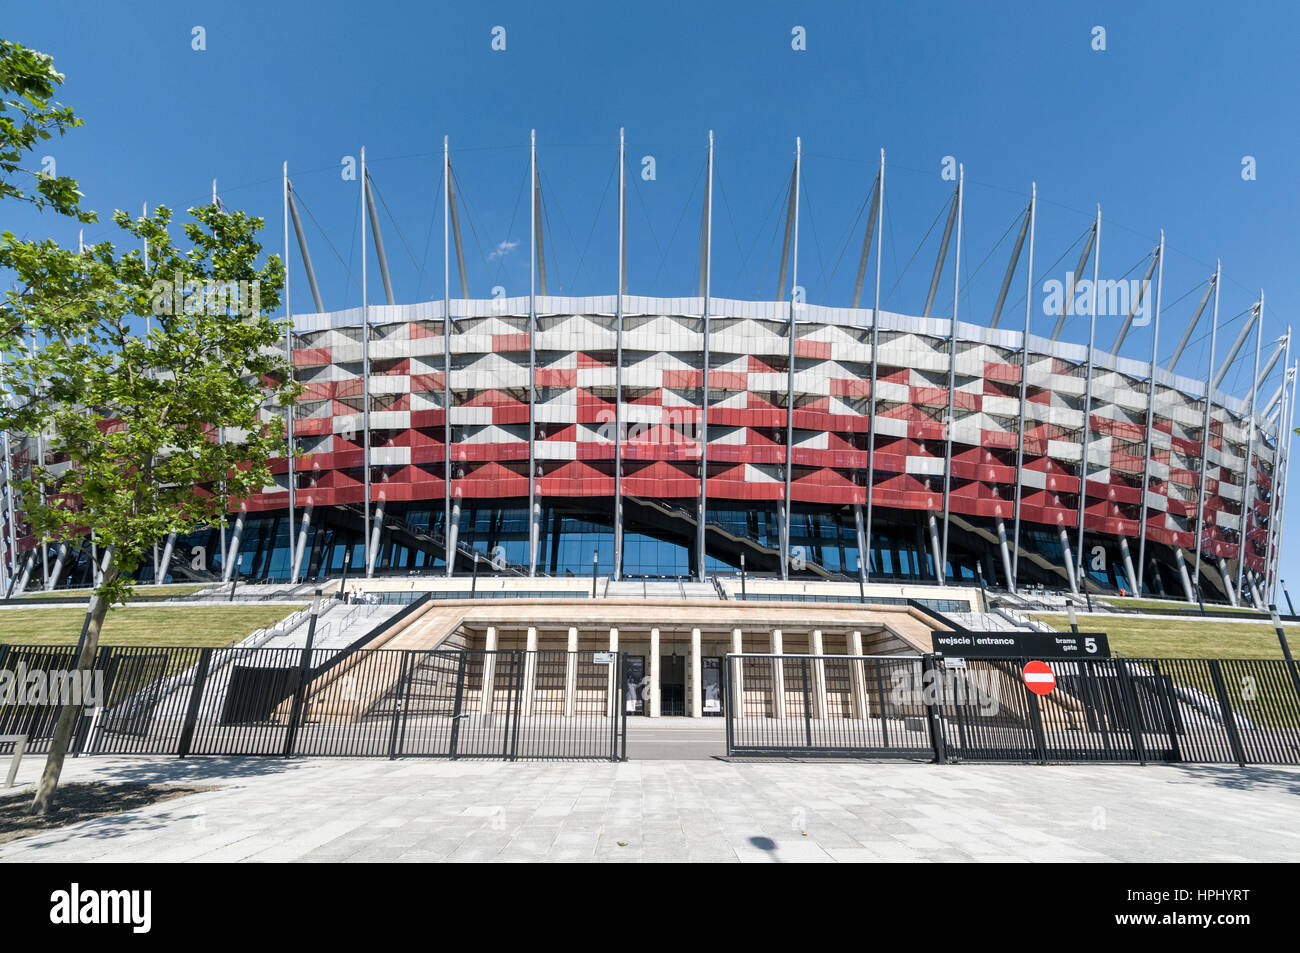 The Stadion Narodowy im. Kazimierza Górskiego, known for sponsorship reasons as the PGE Narodowy since 2015, is a retractable roof football stadium Stock Photo